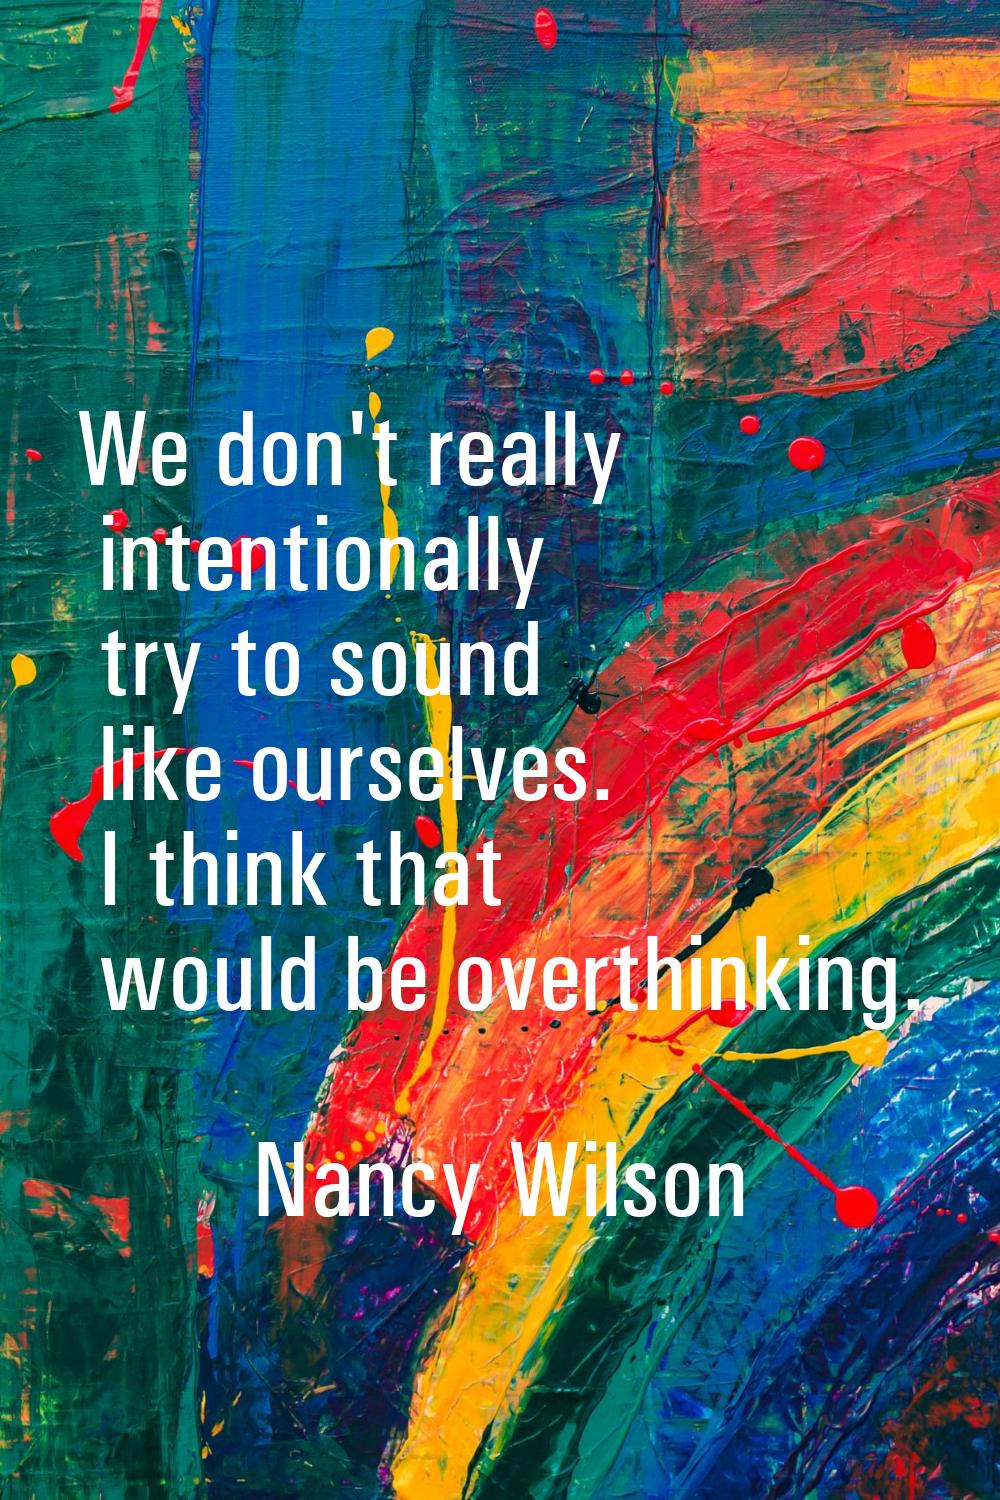 We don't really intentionally try to sound like ourselves. I think that would be overthinking.